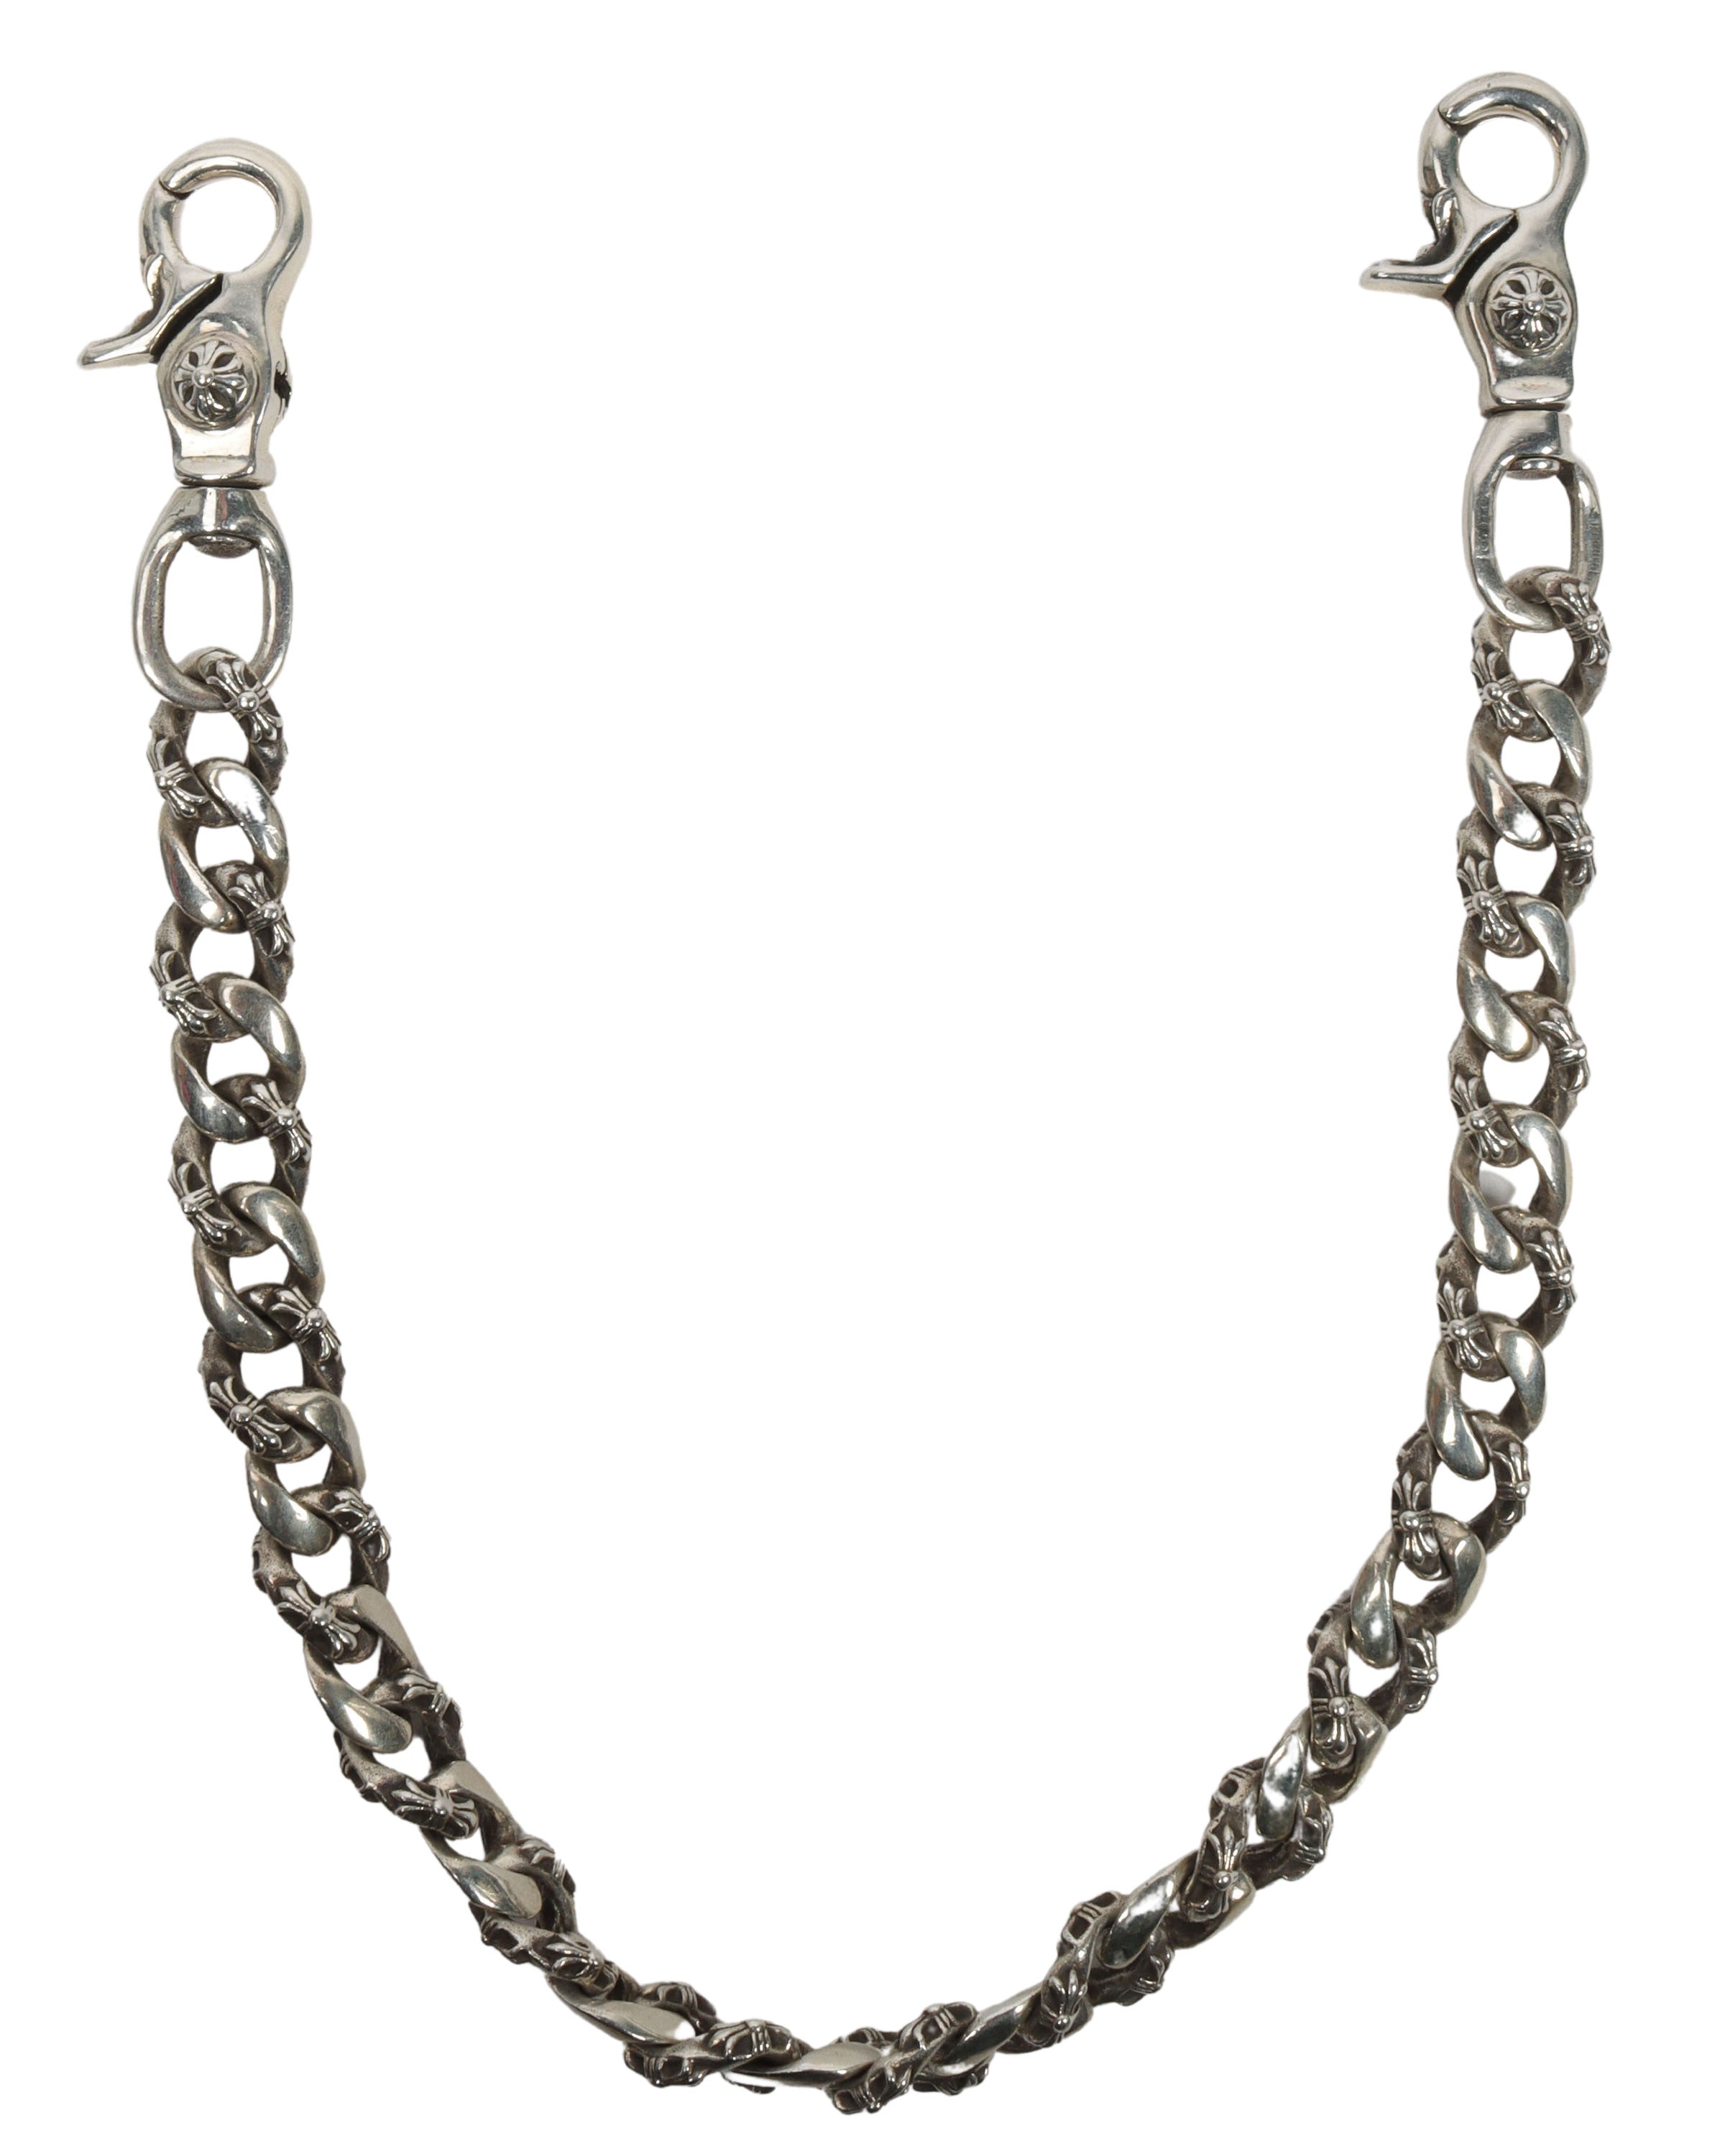 Heavy Chrome Plated Double Strand Link Wallet Chain